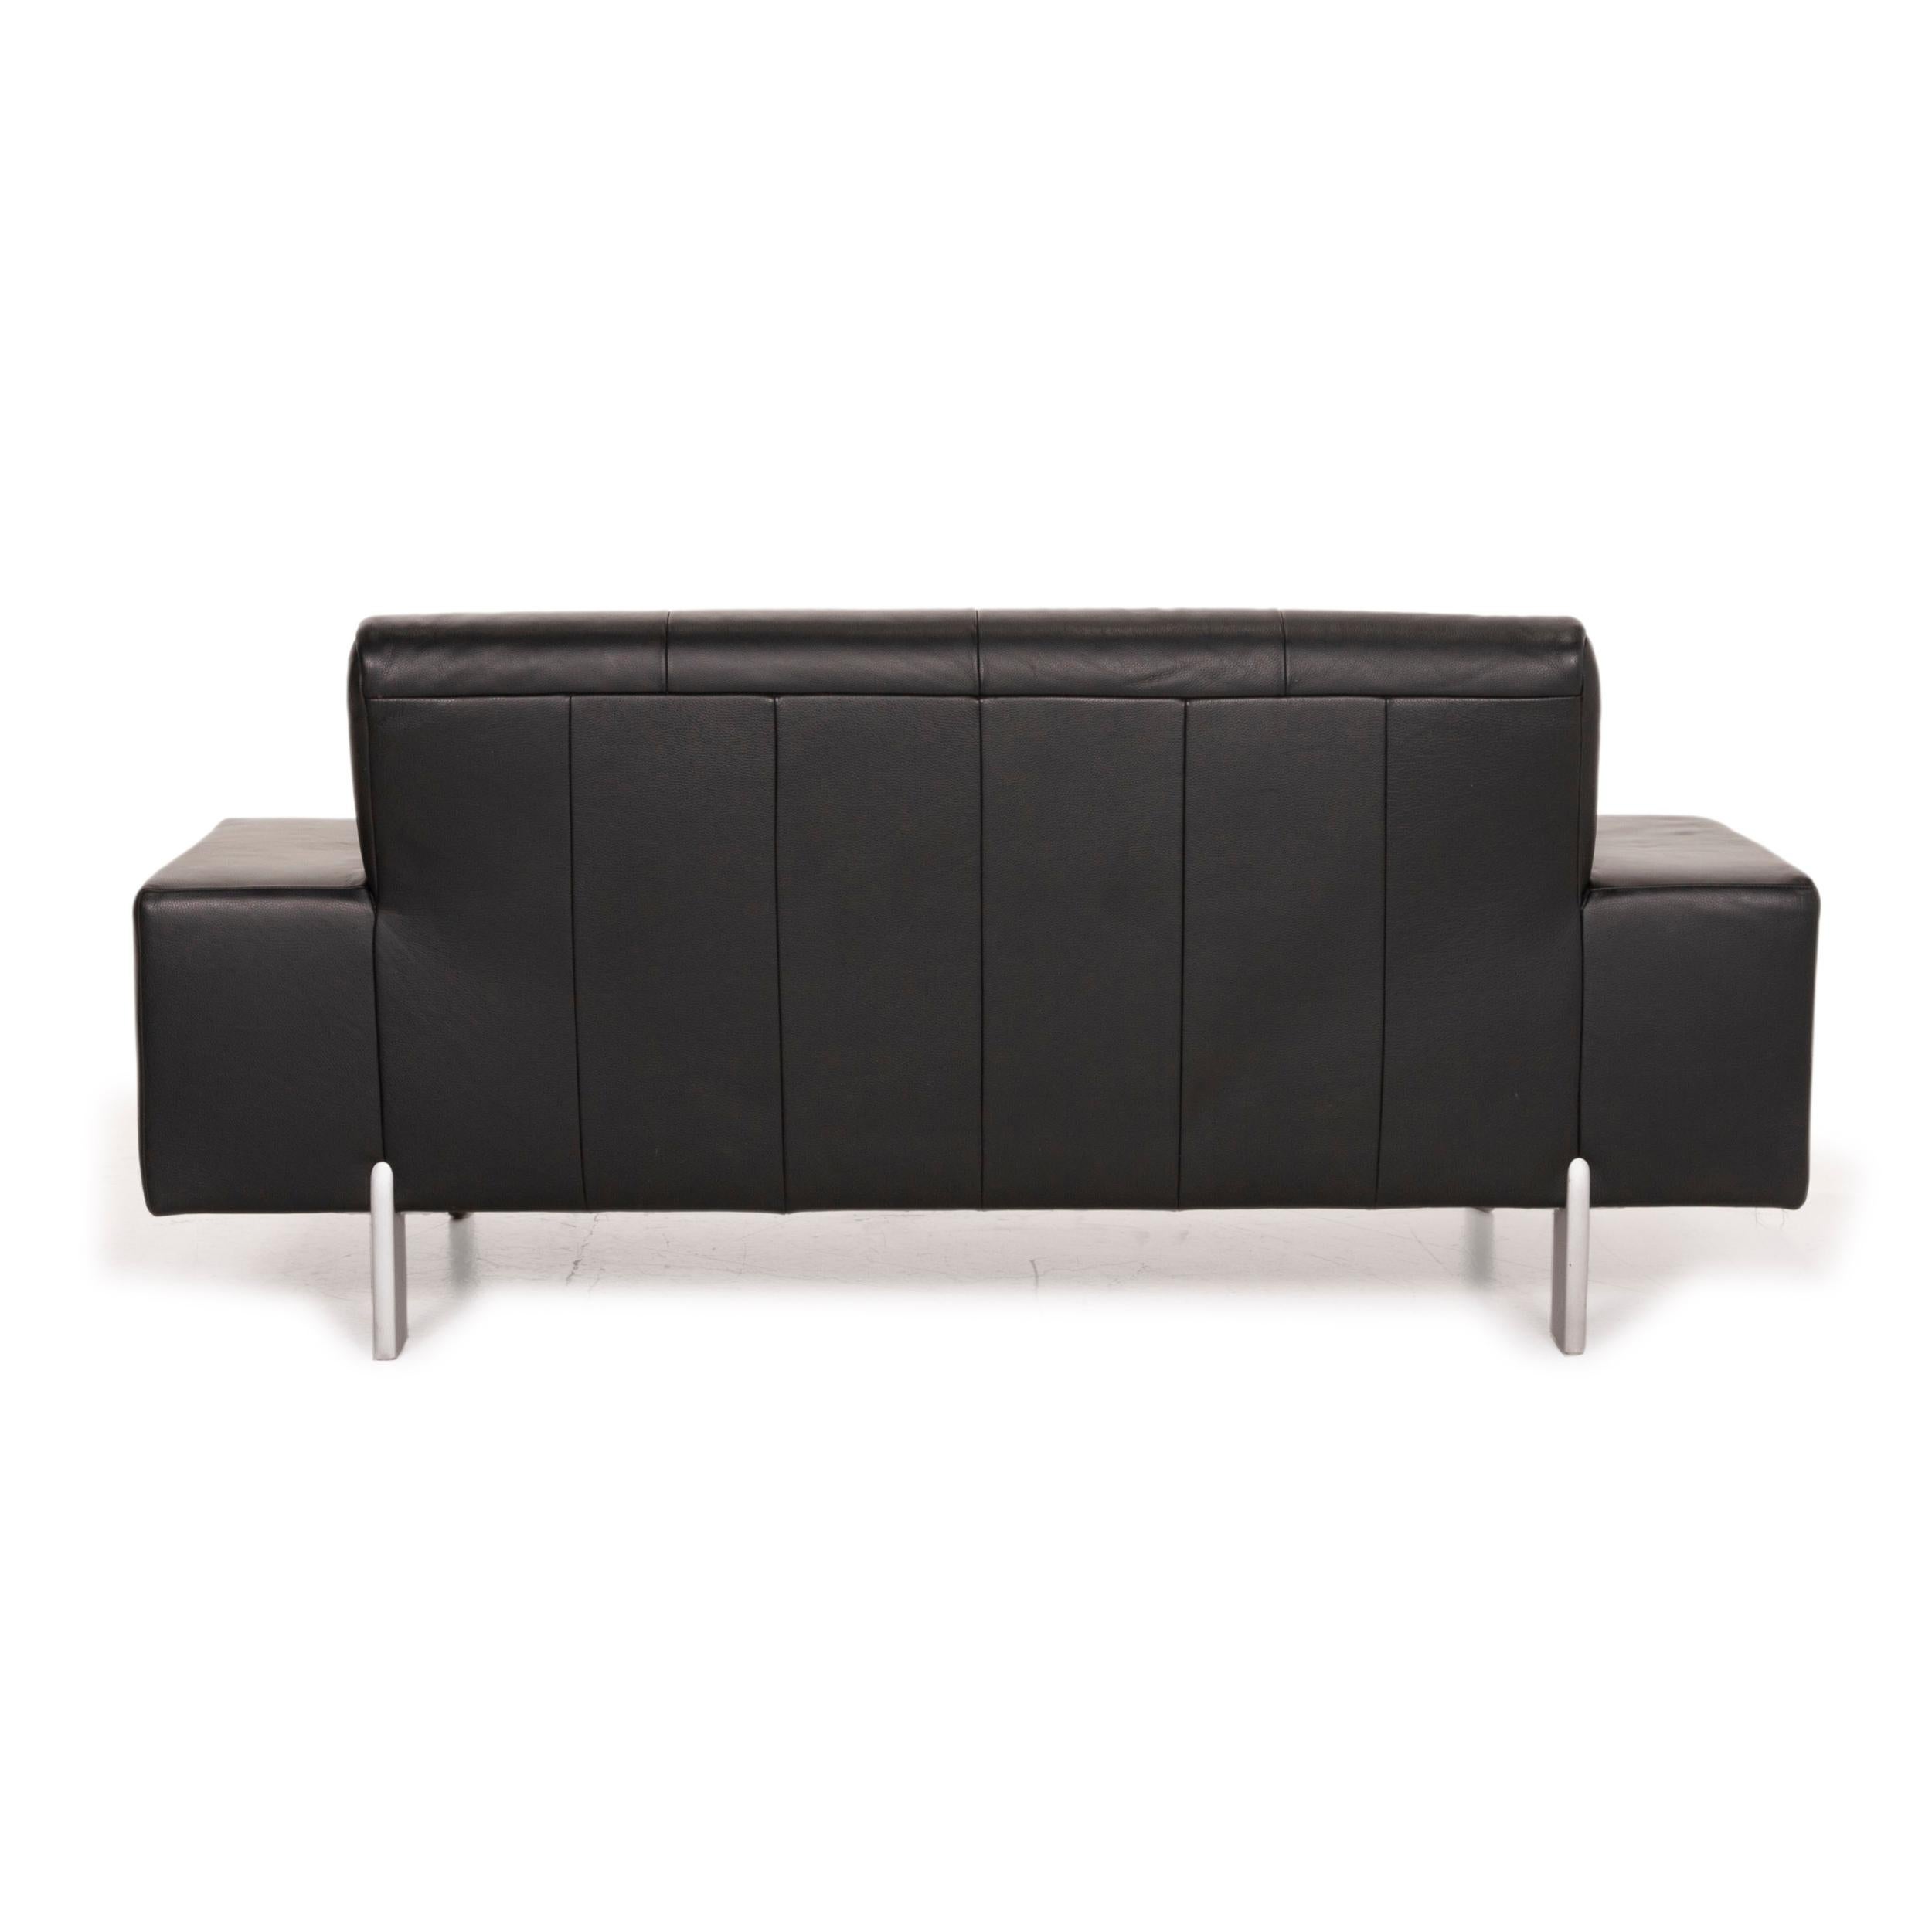 Rolf Benz AK 644 Leather Sofa Black Two-Seater Couch 3